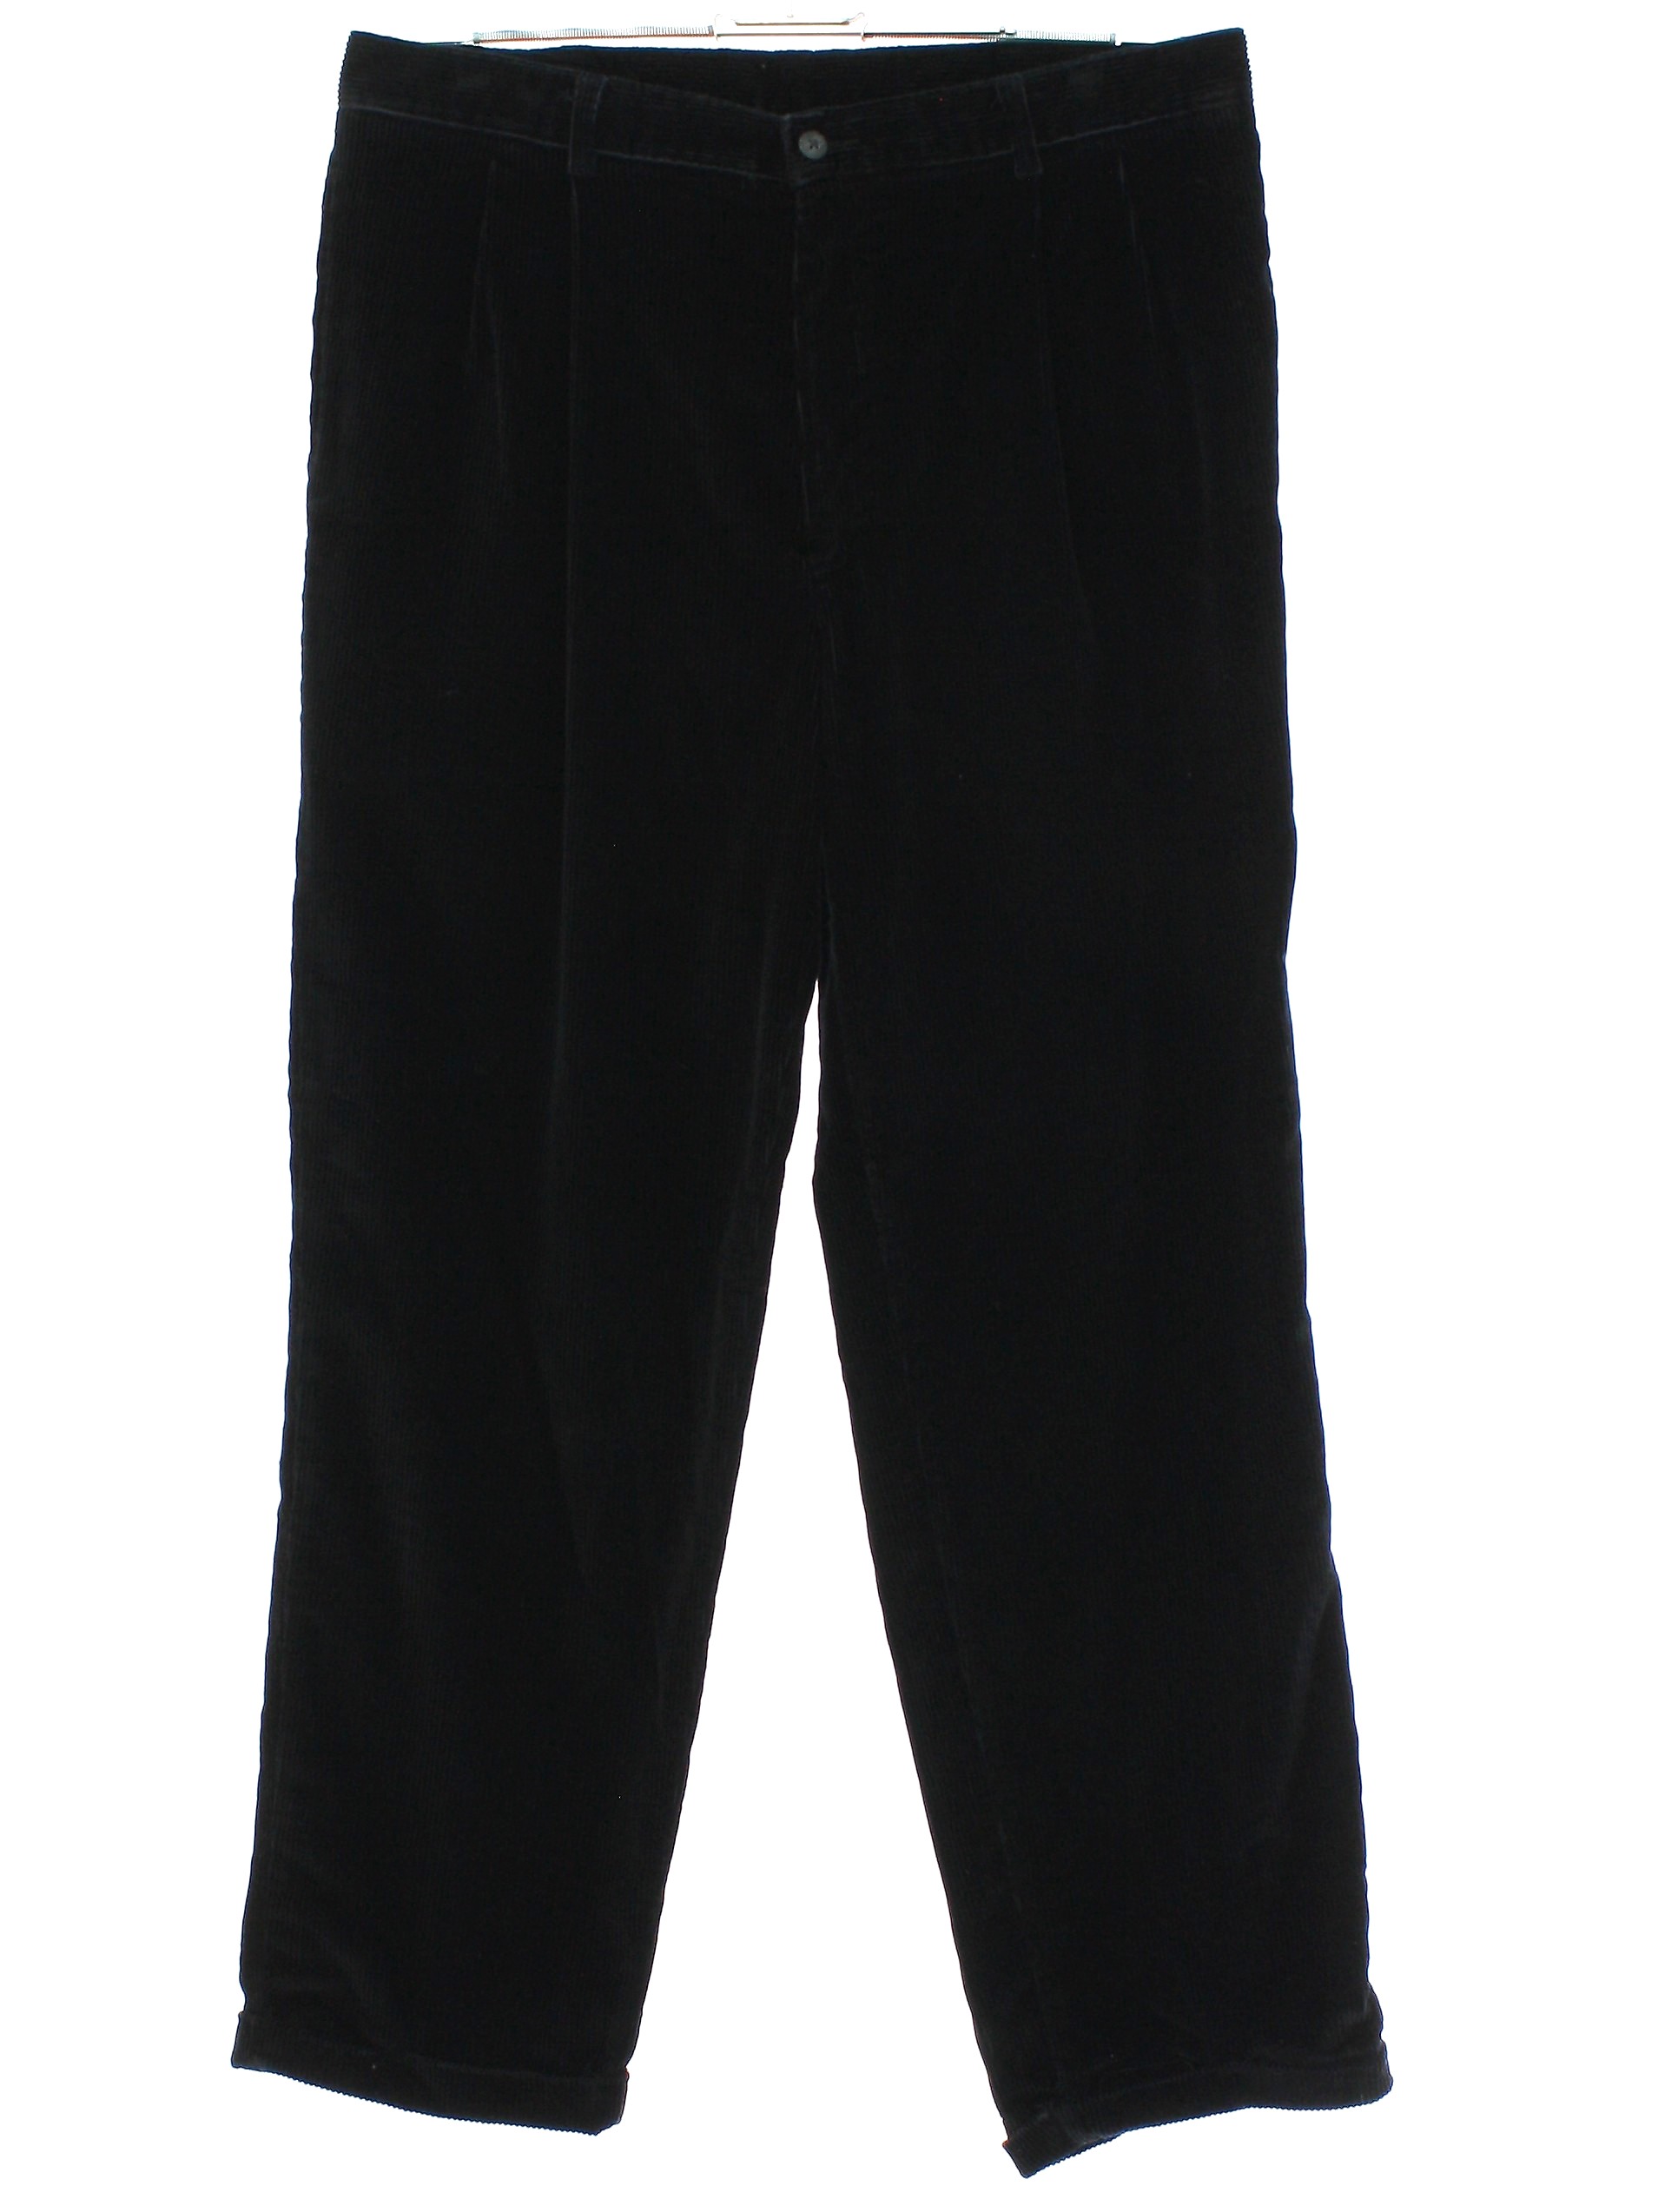 Croft and Barrow Eighties Vintage Pants: 80s Style (made in 90s) -Croft ...